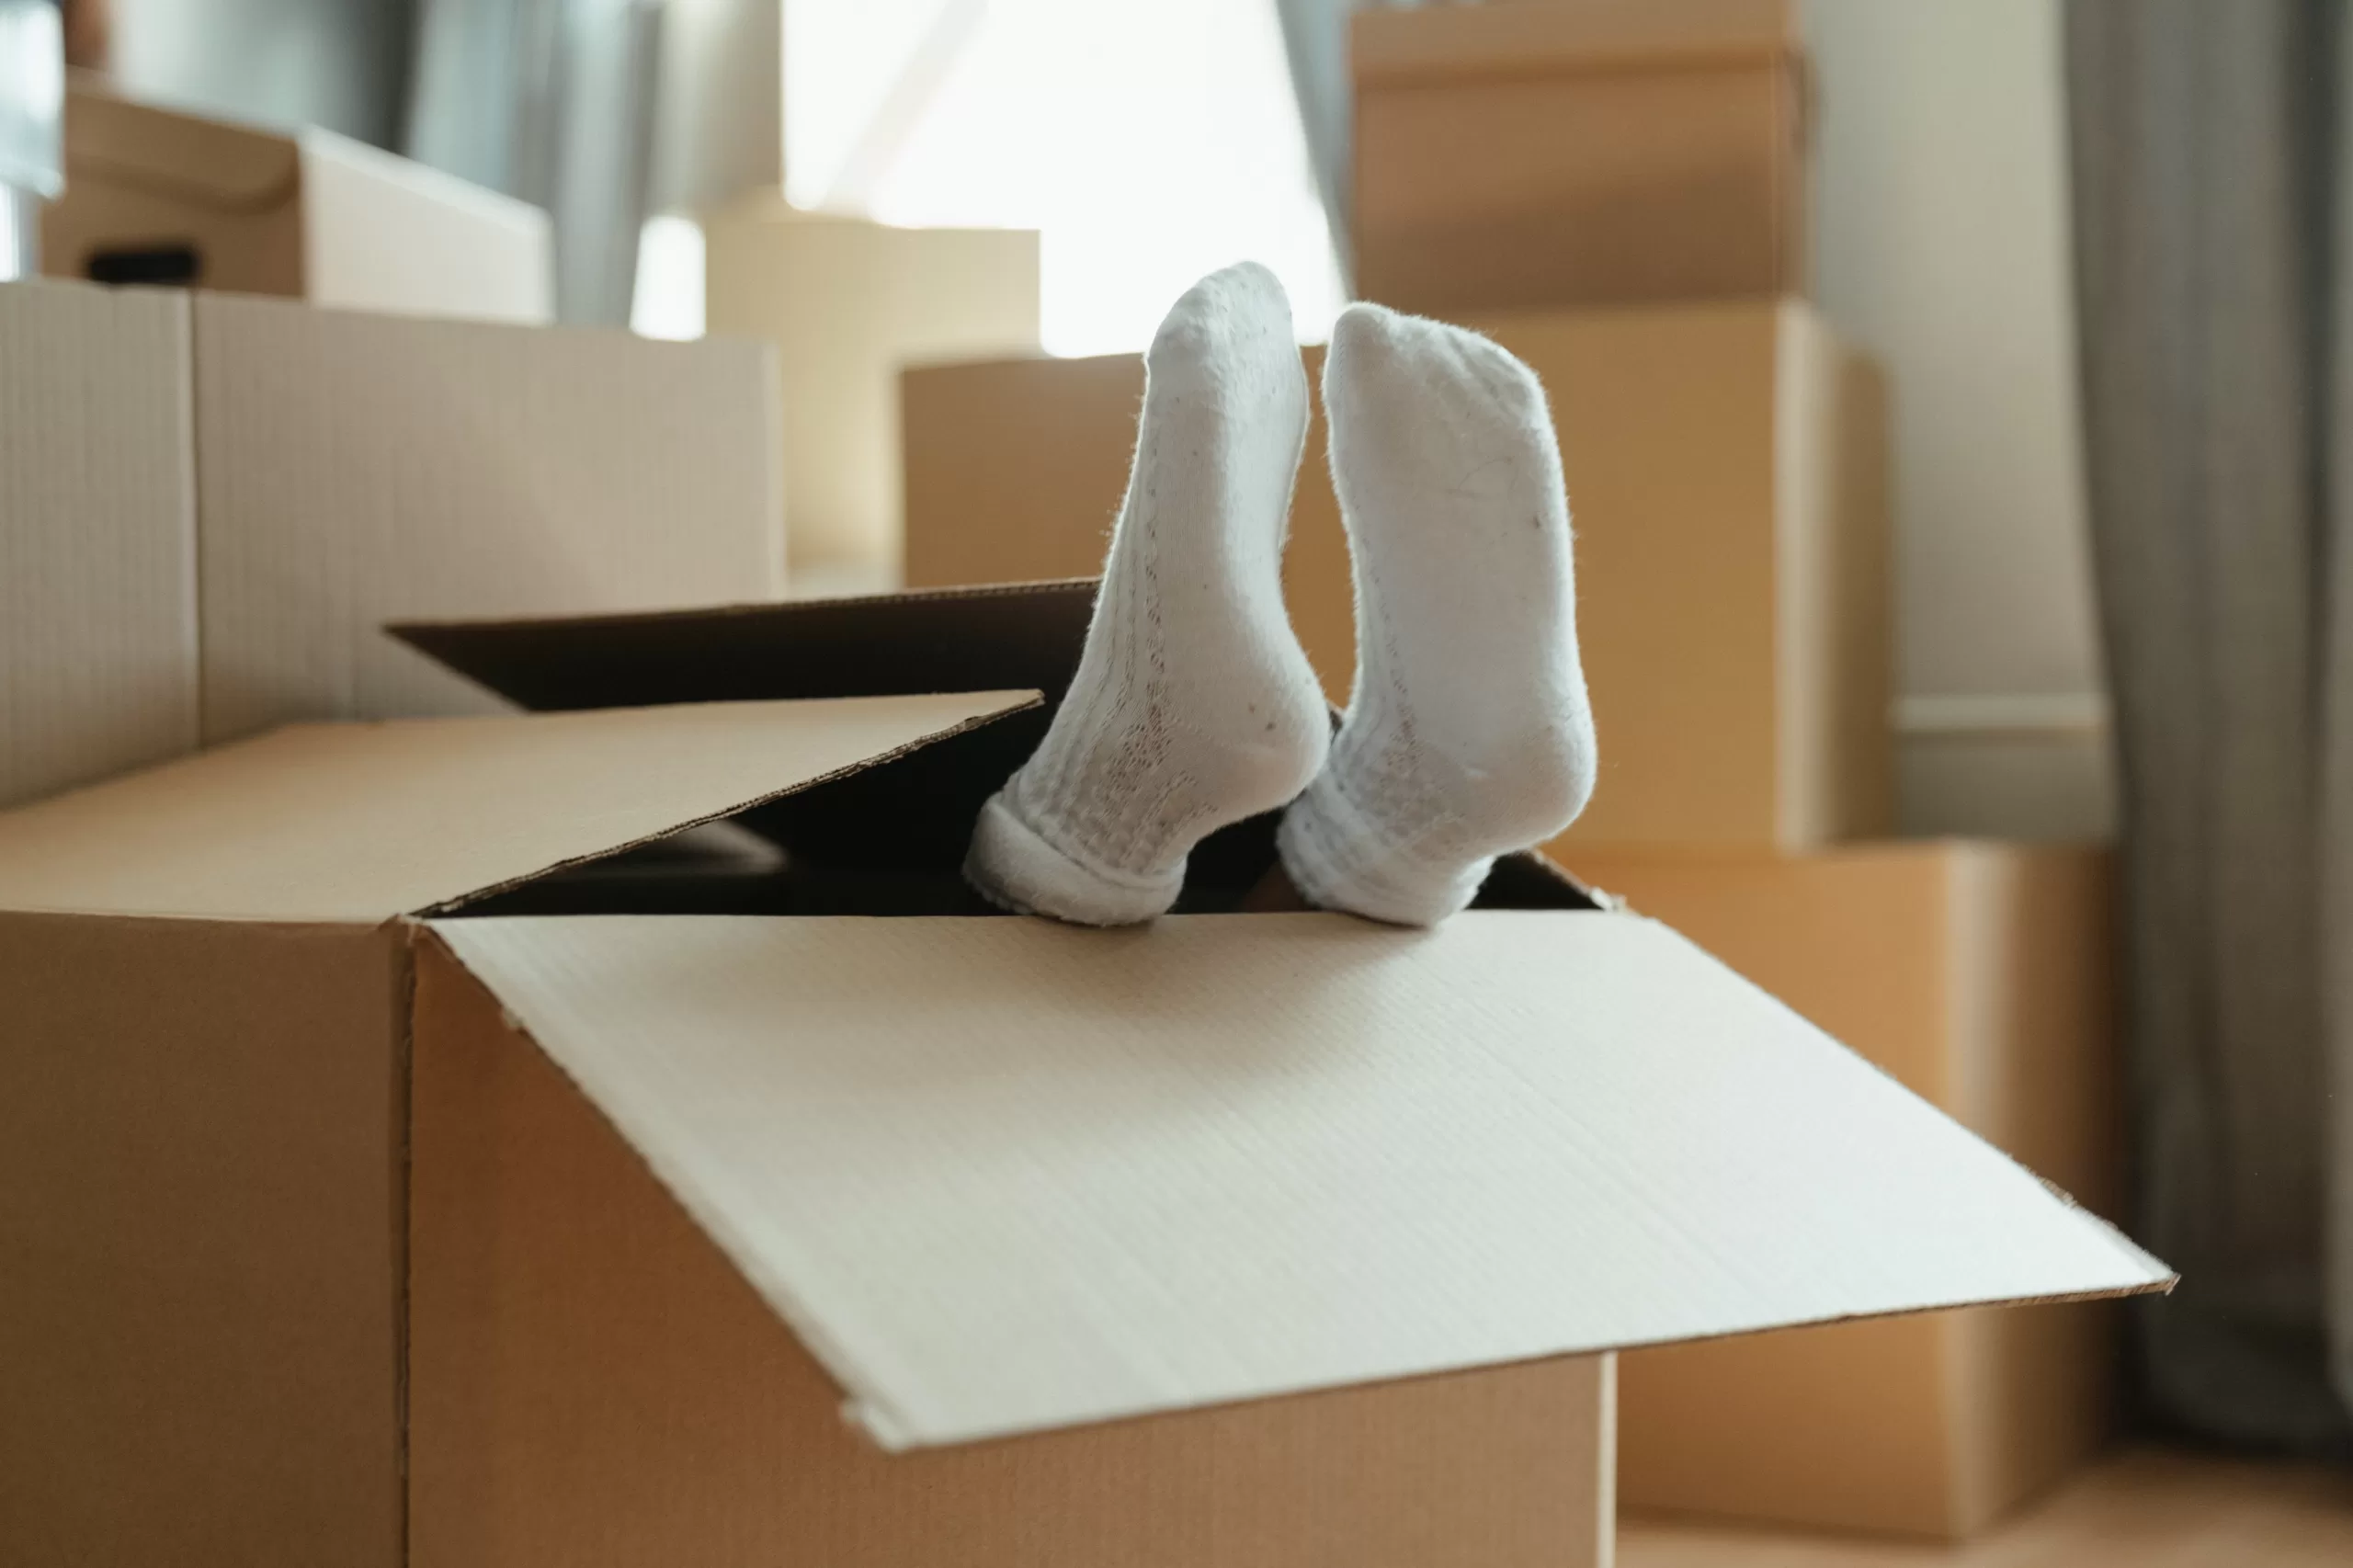 Essential Tips for Planning Your Belongings for Storage